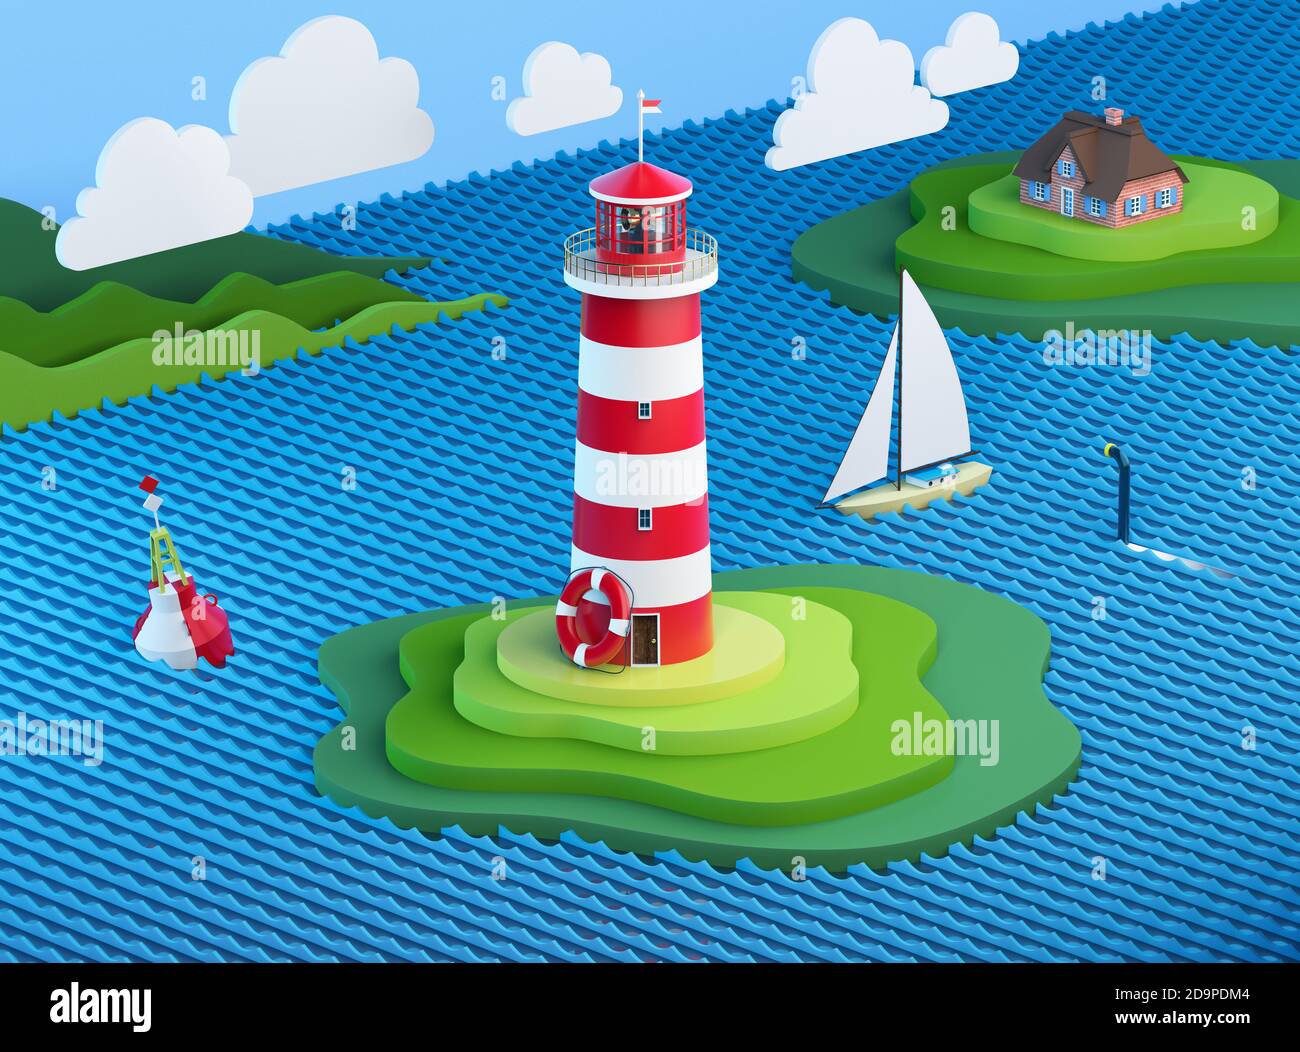 Stylized seascape with lighthouse, hallig, buoy, sailing ship, clouds and hills Stock Photo